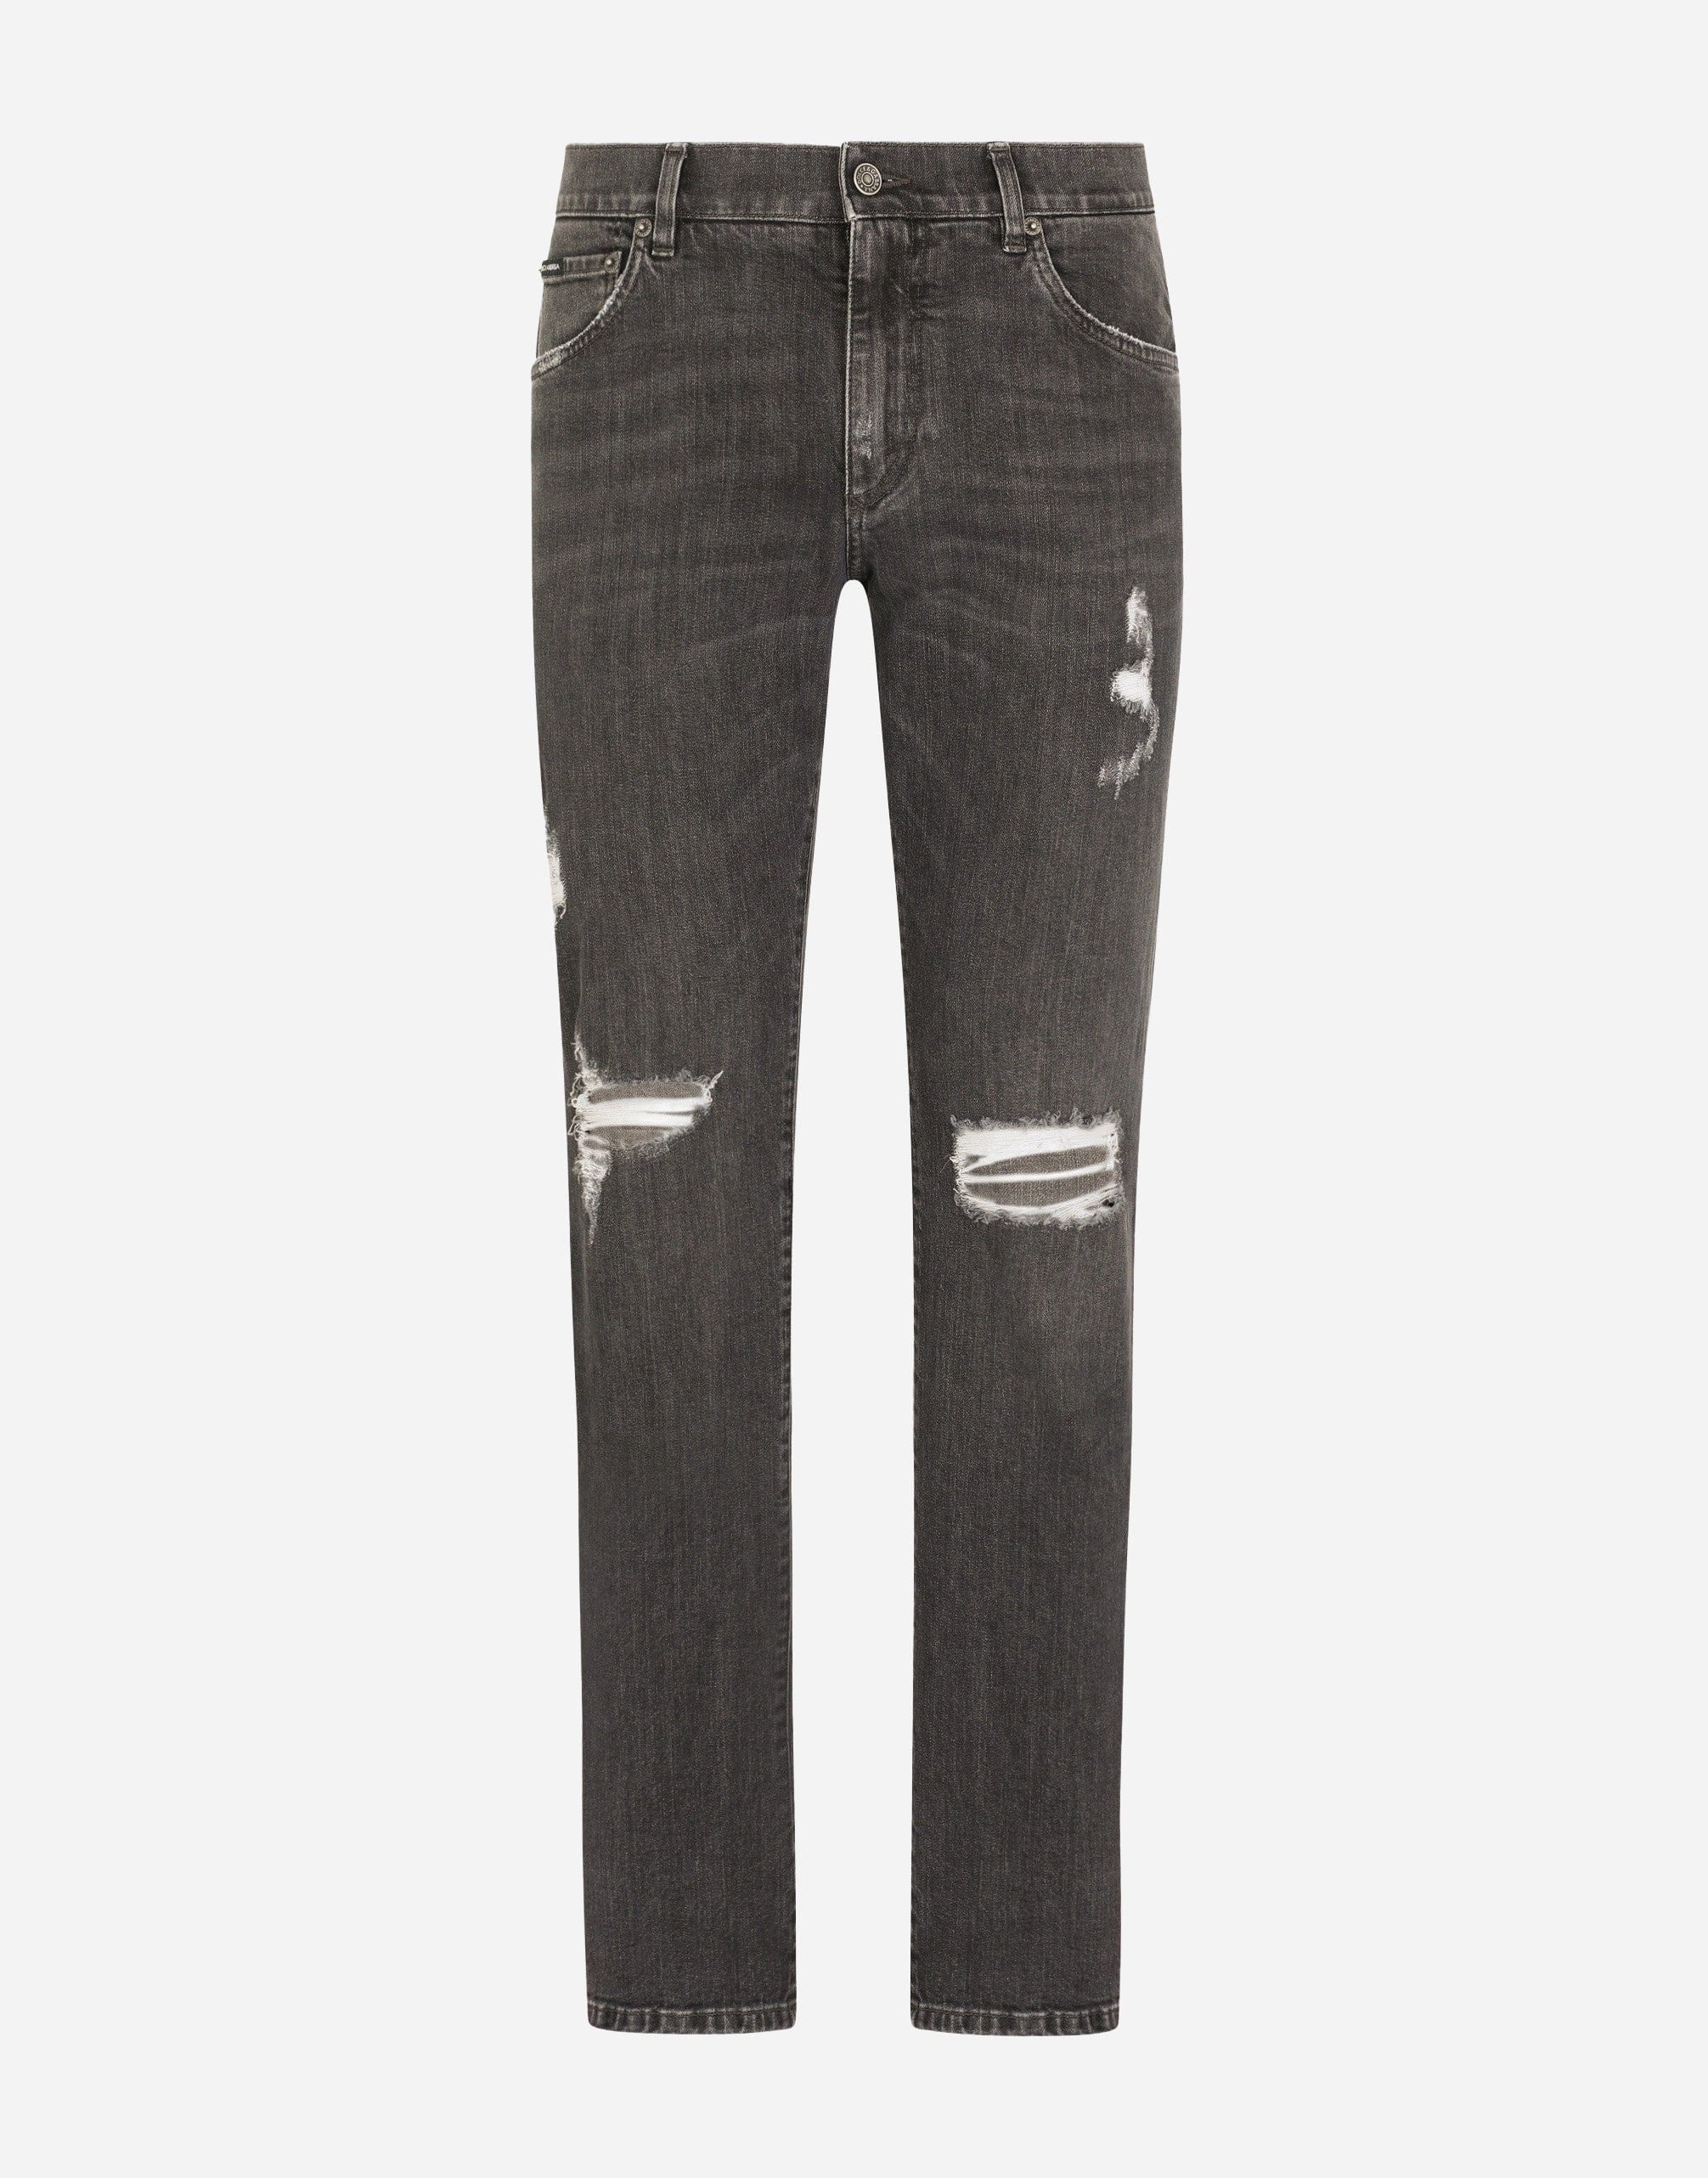 Dolce & Gabbana Slim-Fit Cotton Jeans With Rips